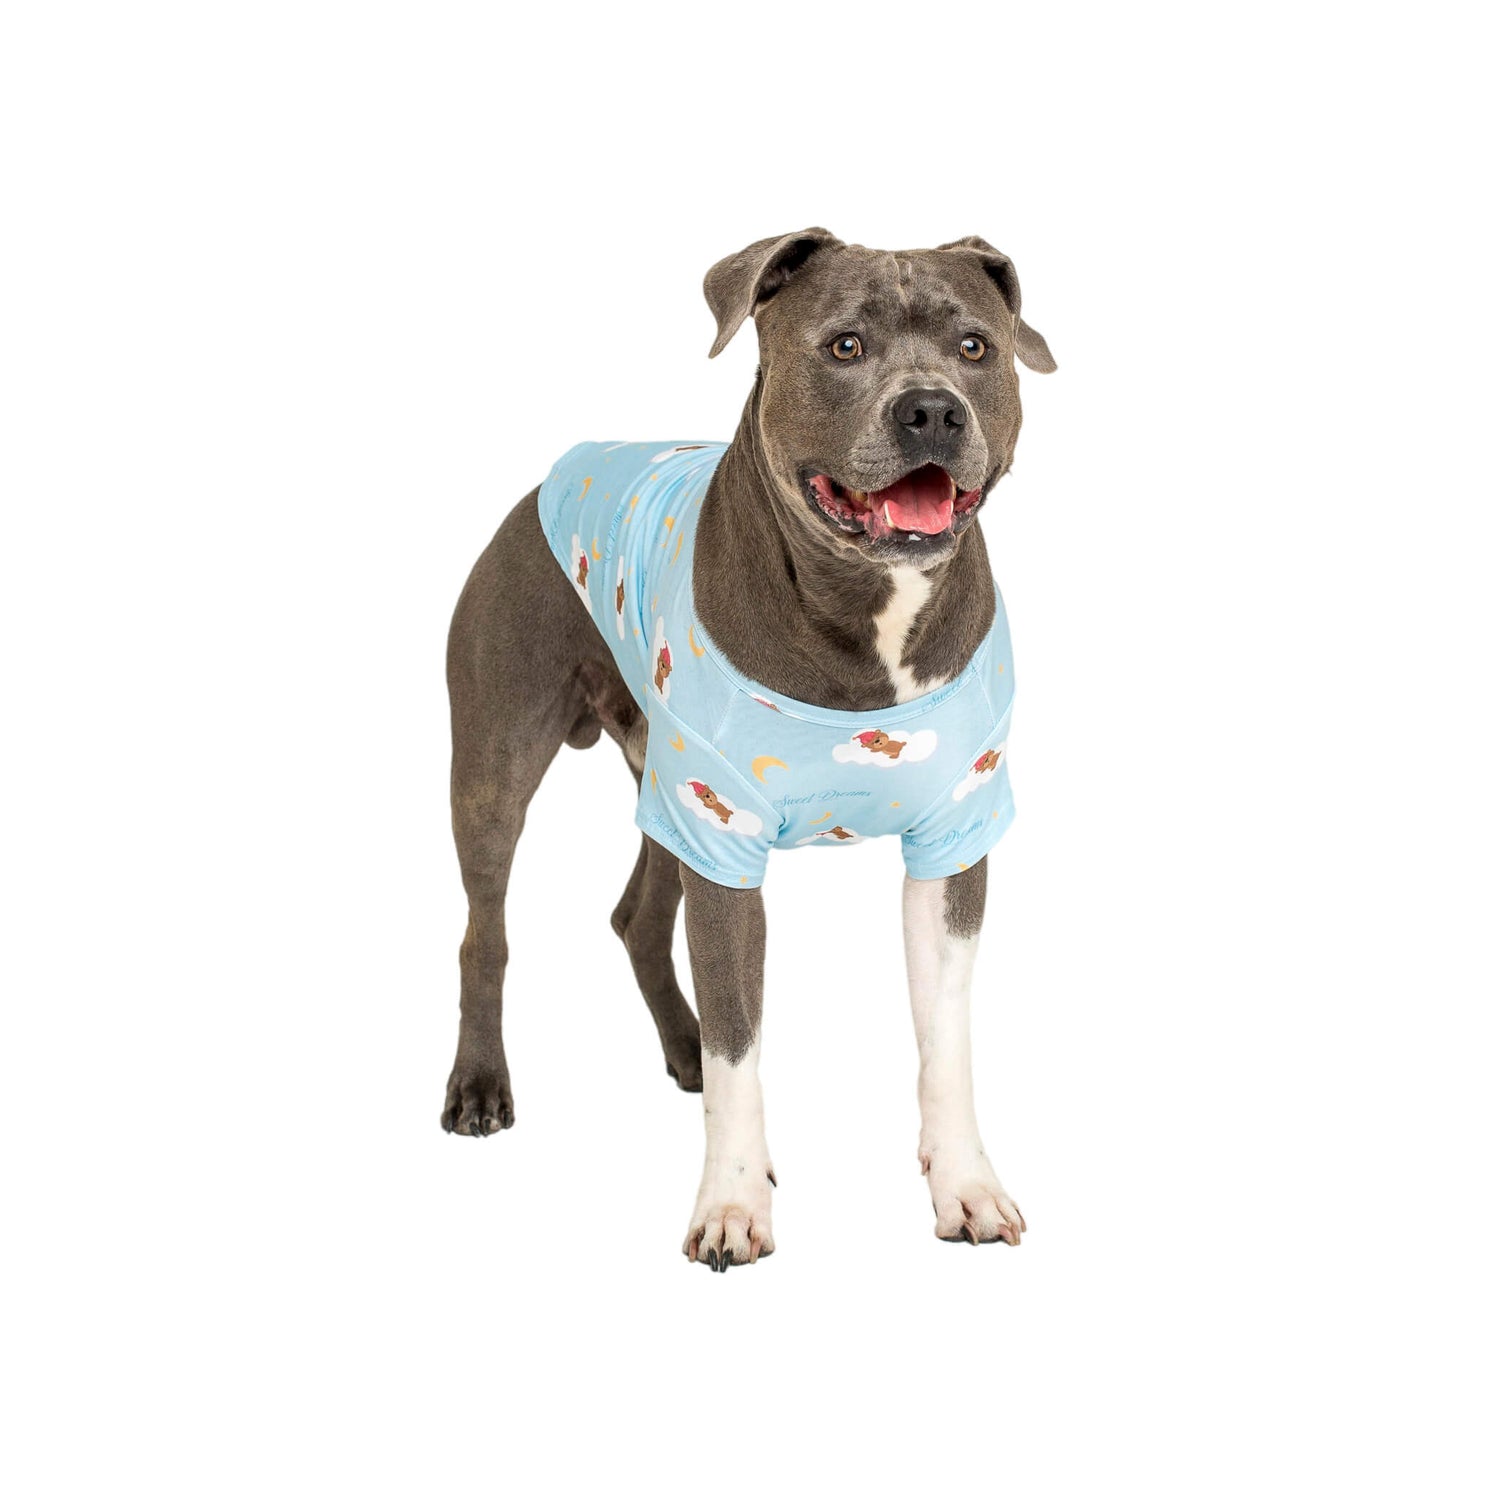 An American Staffy standing up wearing our Lil Dreamer dog sleepwear.